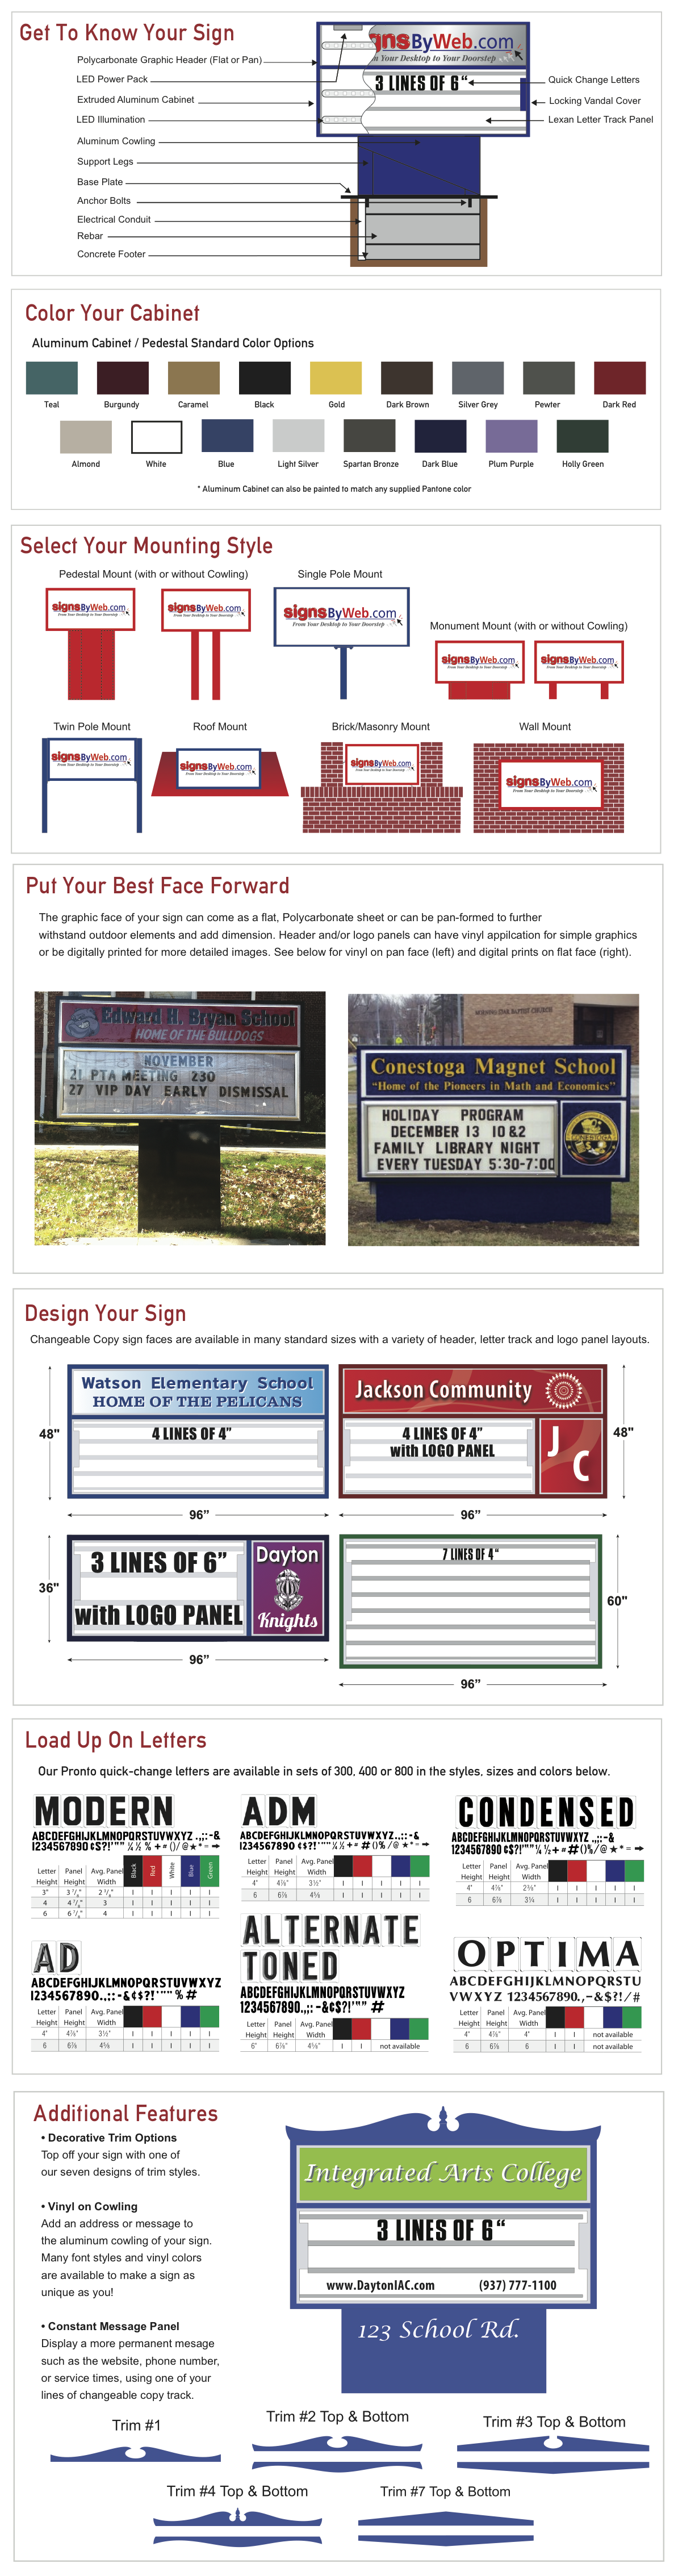 Signs By Web - Info Page - Public Works Changeable Copy Faces